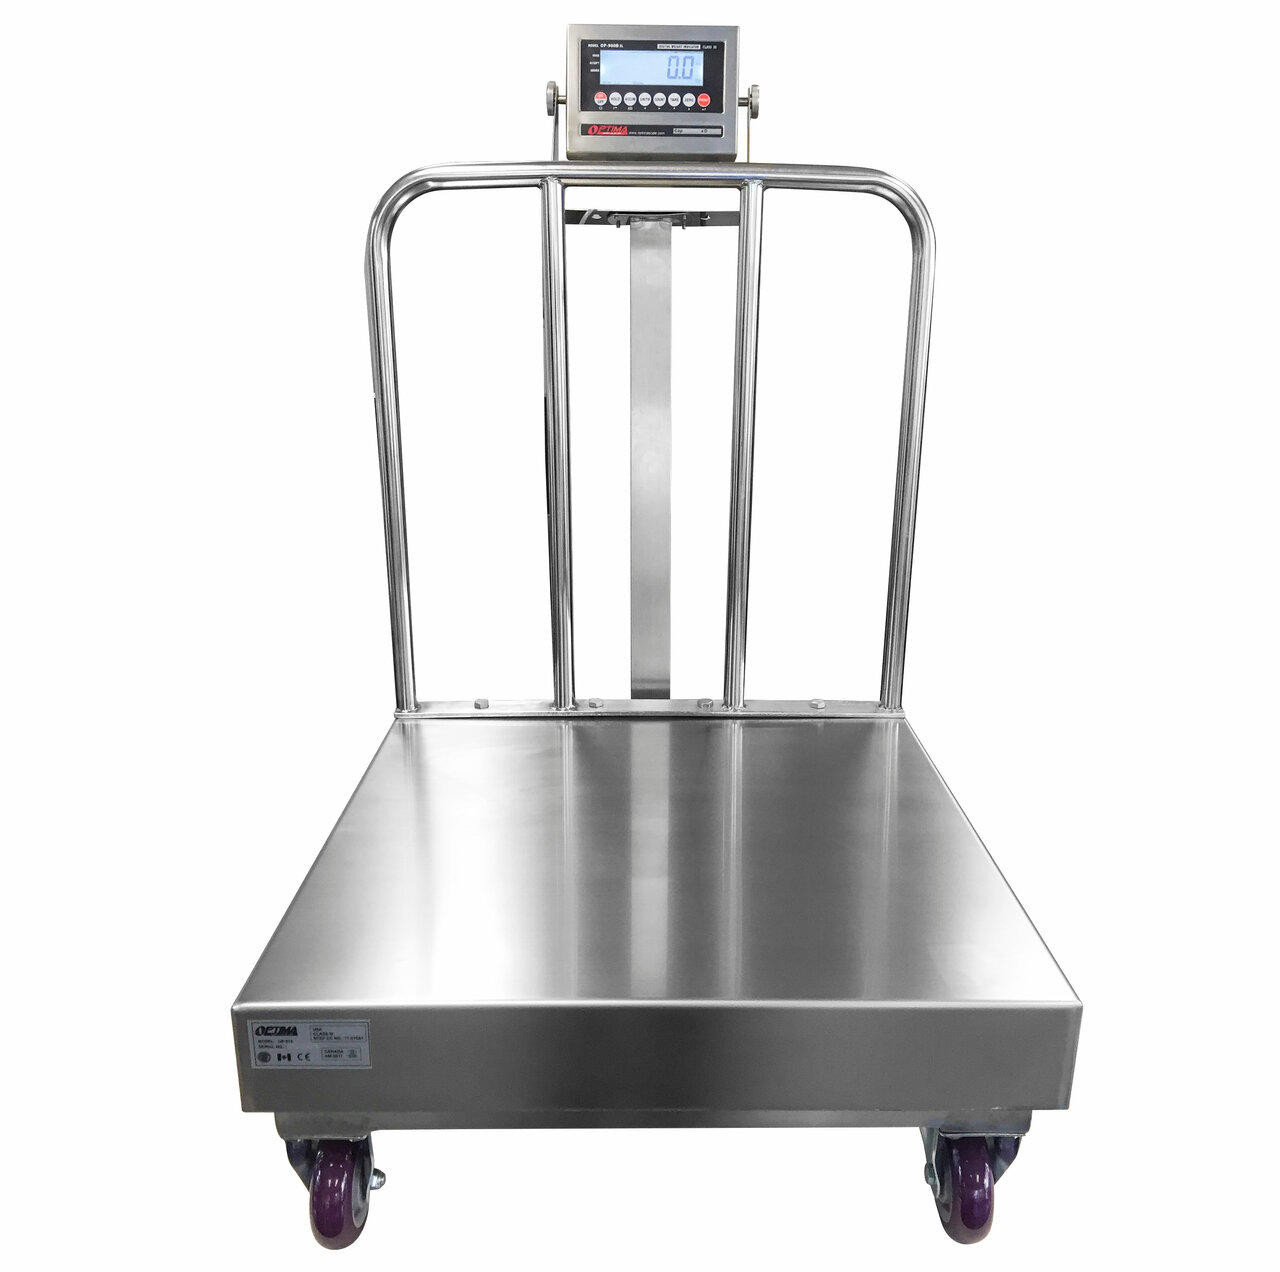 https://cdn11.bigcommerce.com/s-errhy7umuu/images/stencil/1280x1280/products/7620/35033/optima-scale-op-915ssbw-1824-500-stainless-steel-portable-bench-scale-with-casters-18-x-24-500-lb-x-0.1-lb-ntep-class-iii__26465.1655243815.jpg?c=2